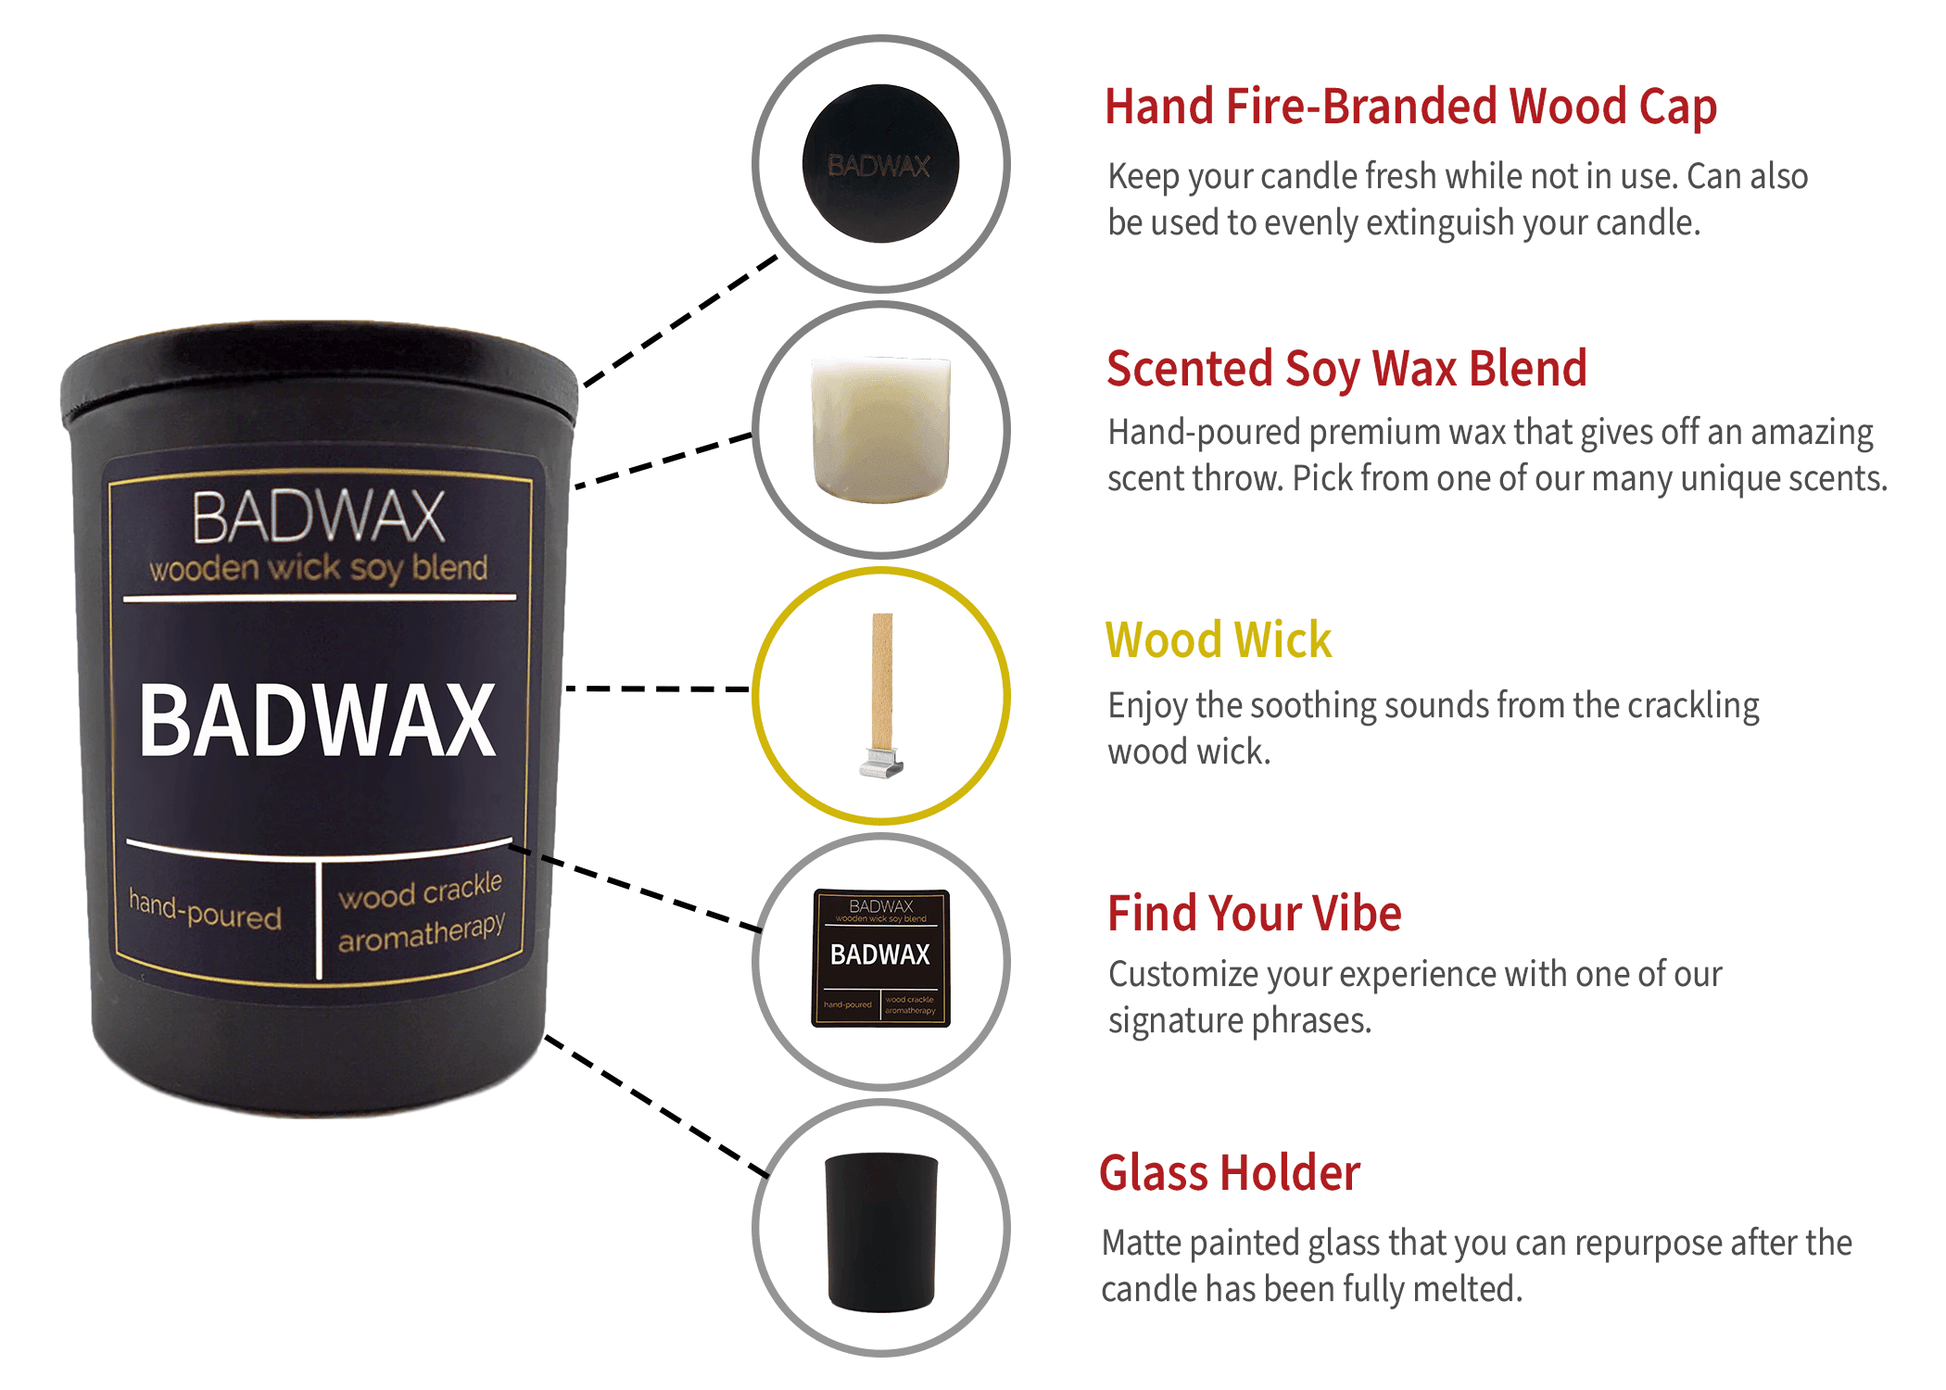 Started From The Bottom - Woodwick Candle - BADWAX